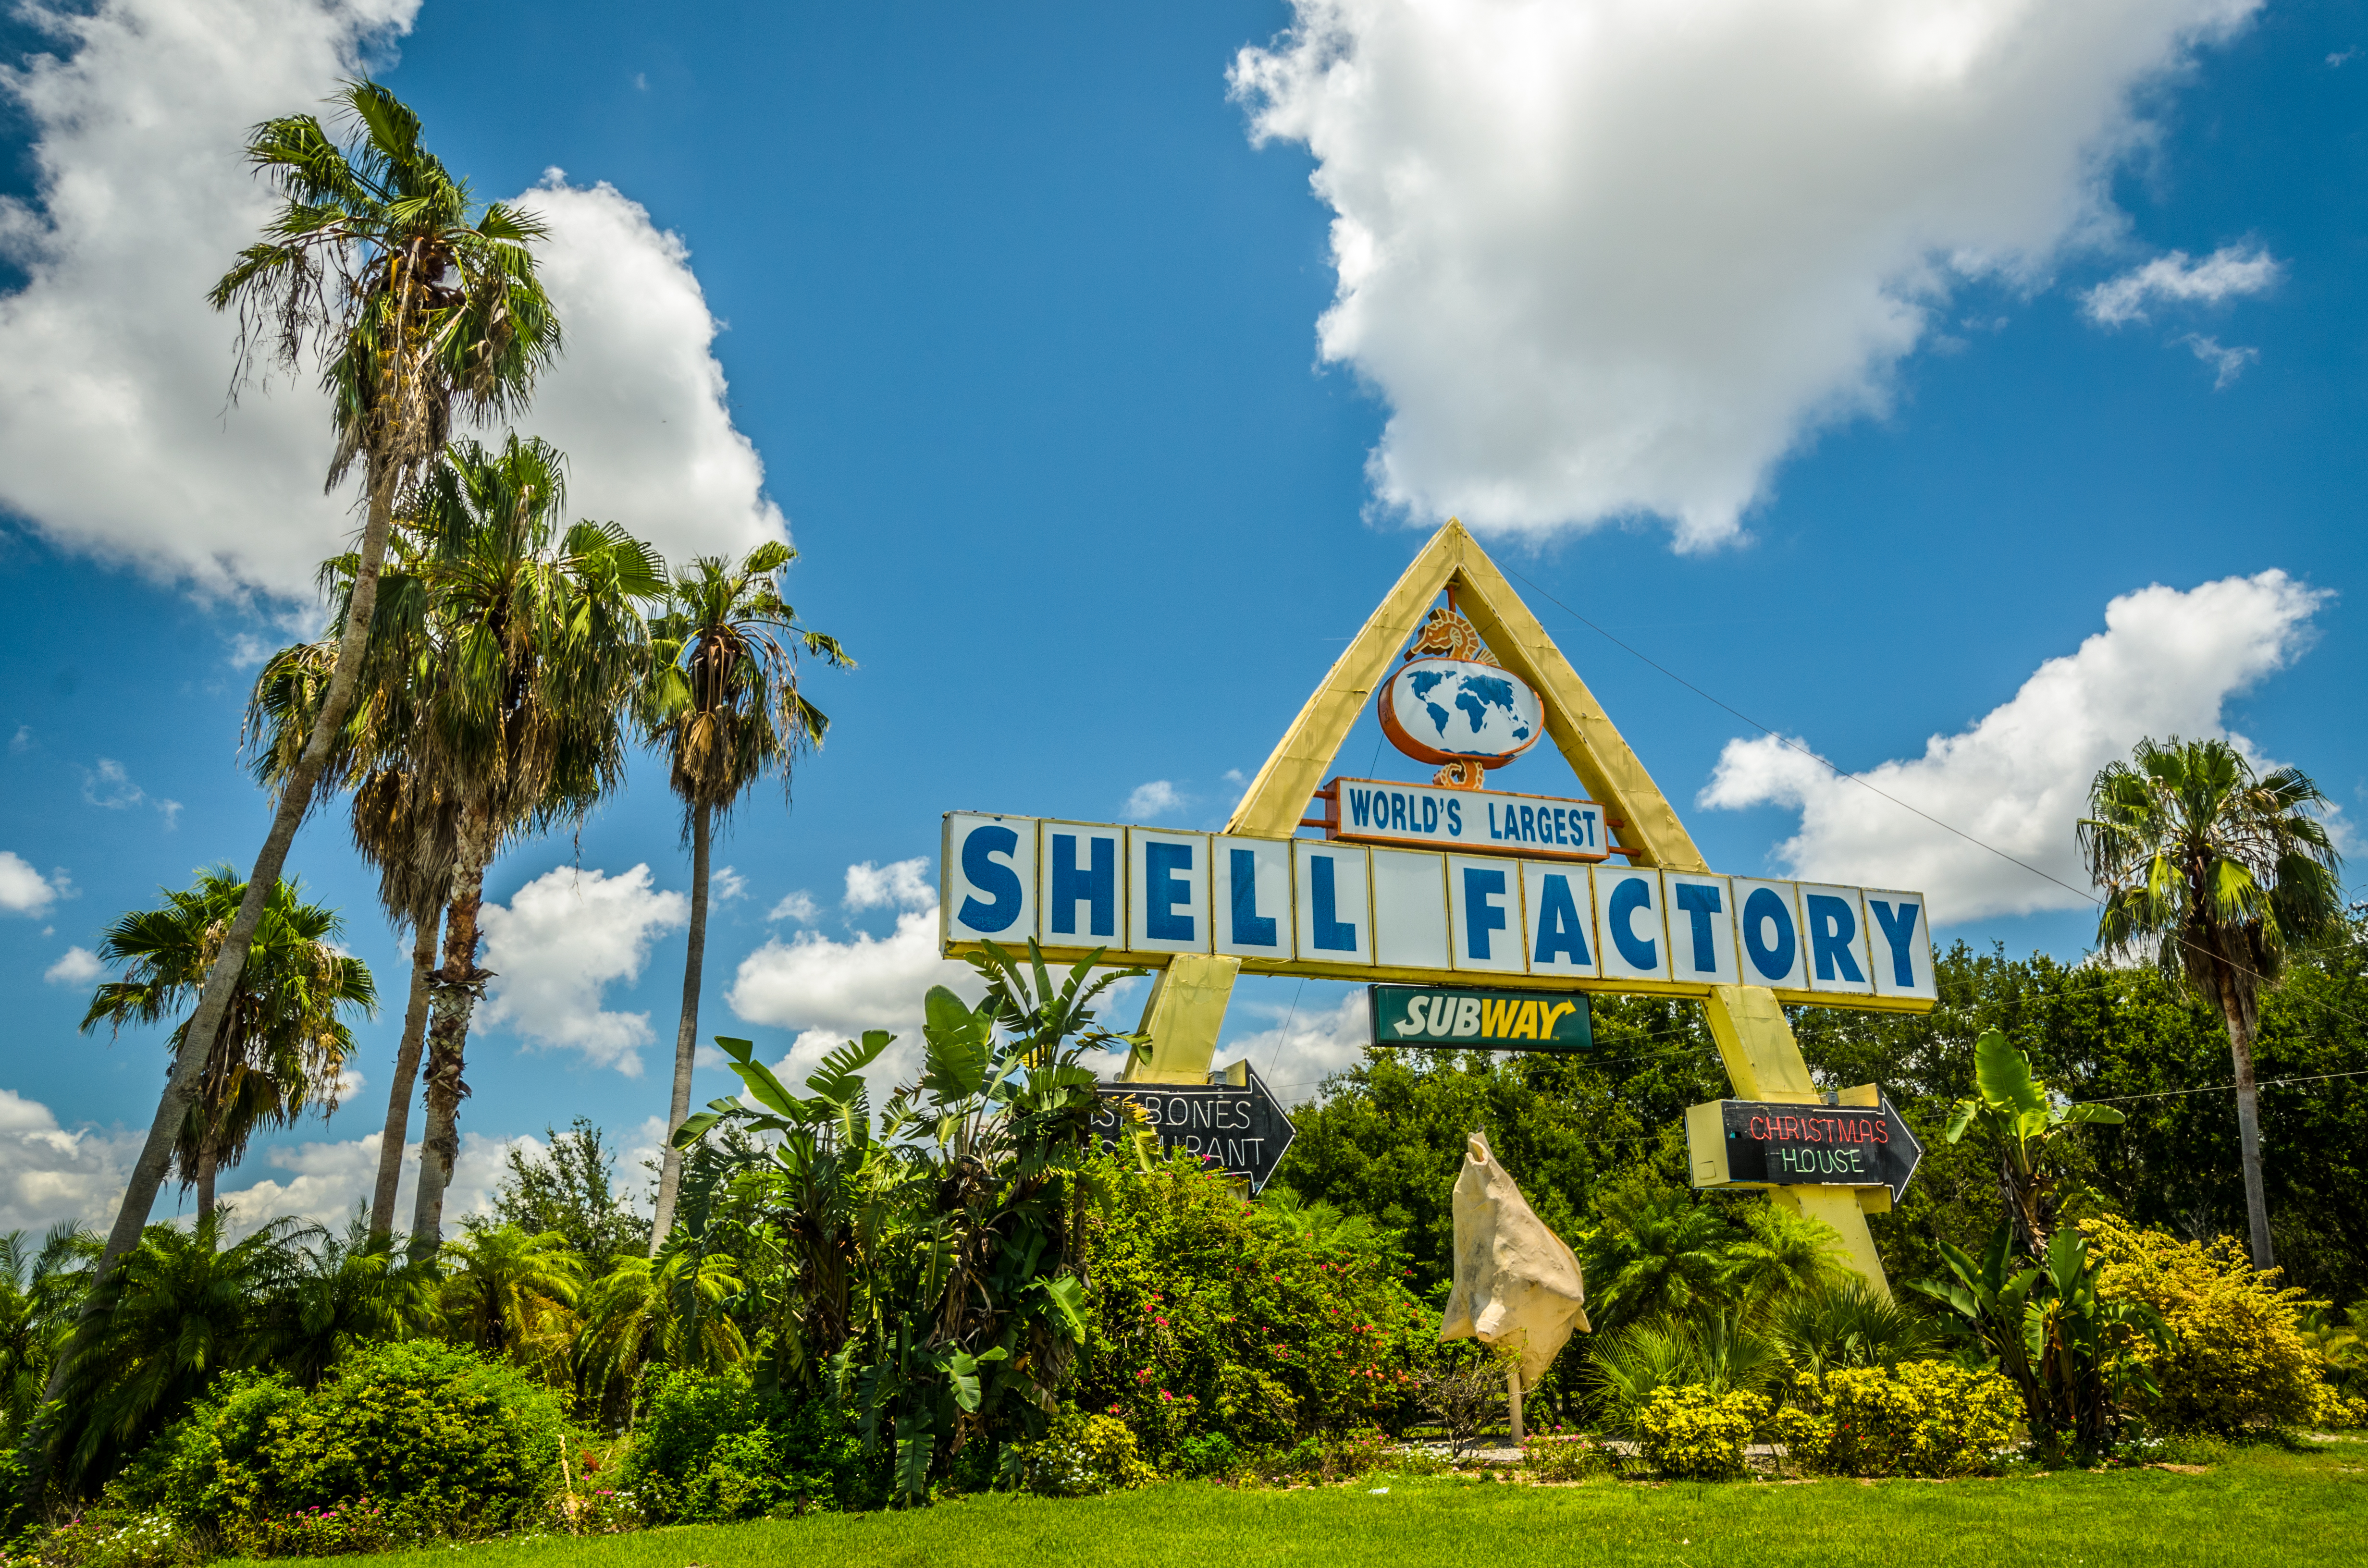 The shell factory sign off the side of the road